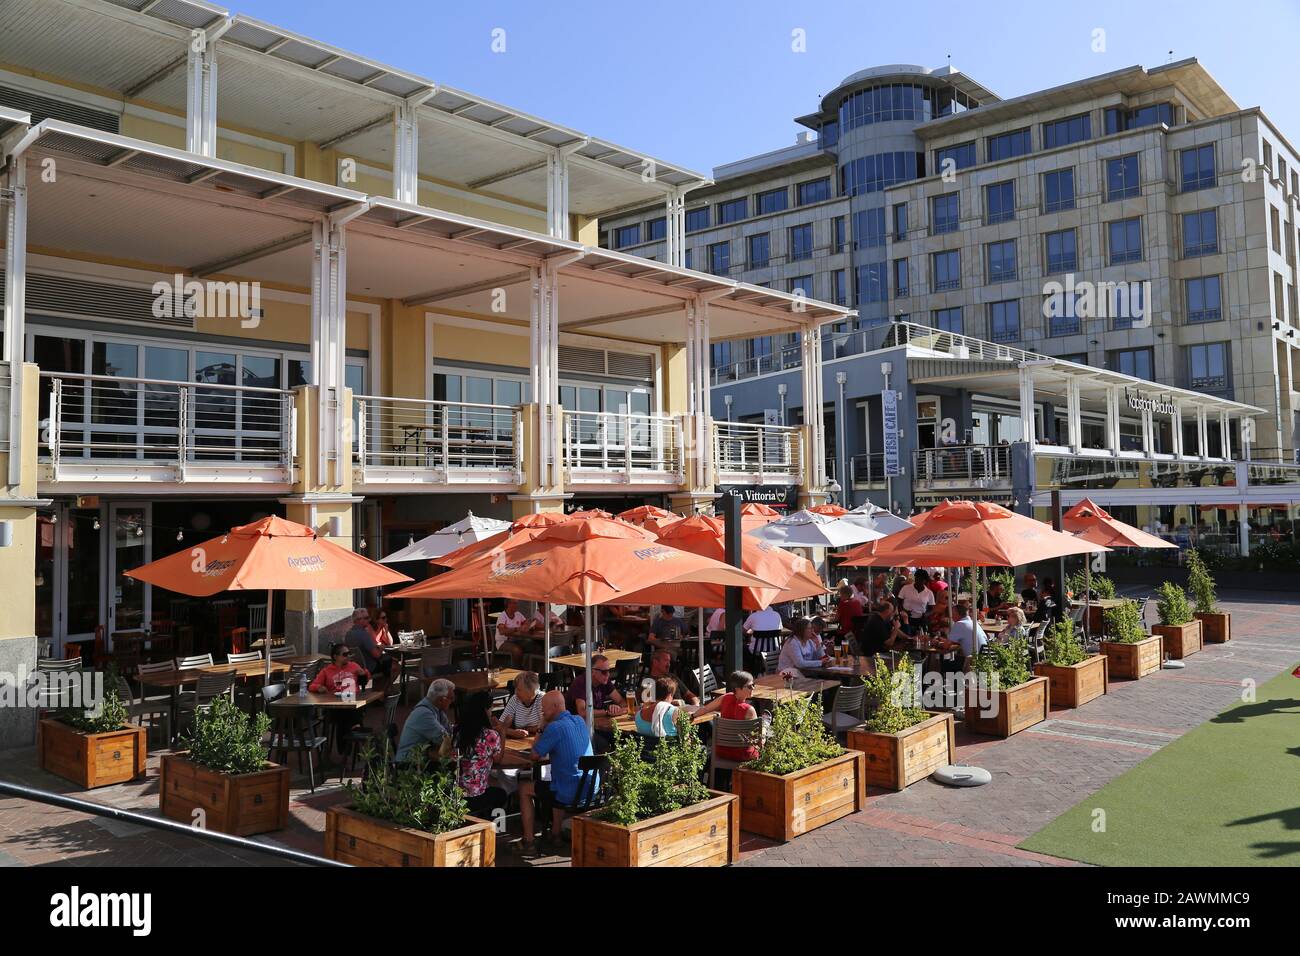 Via Vittoria, Fat Fish Cafe and Kapstadt Brauhaus, V&A Waterfront, Cape Town, Table Bay, Western Cape Province, South Africa, Africa Stock Photo